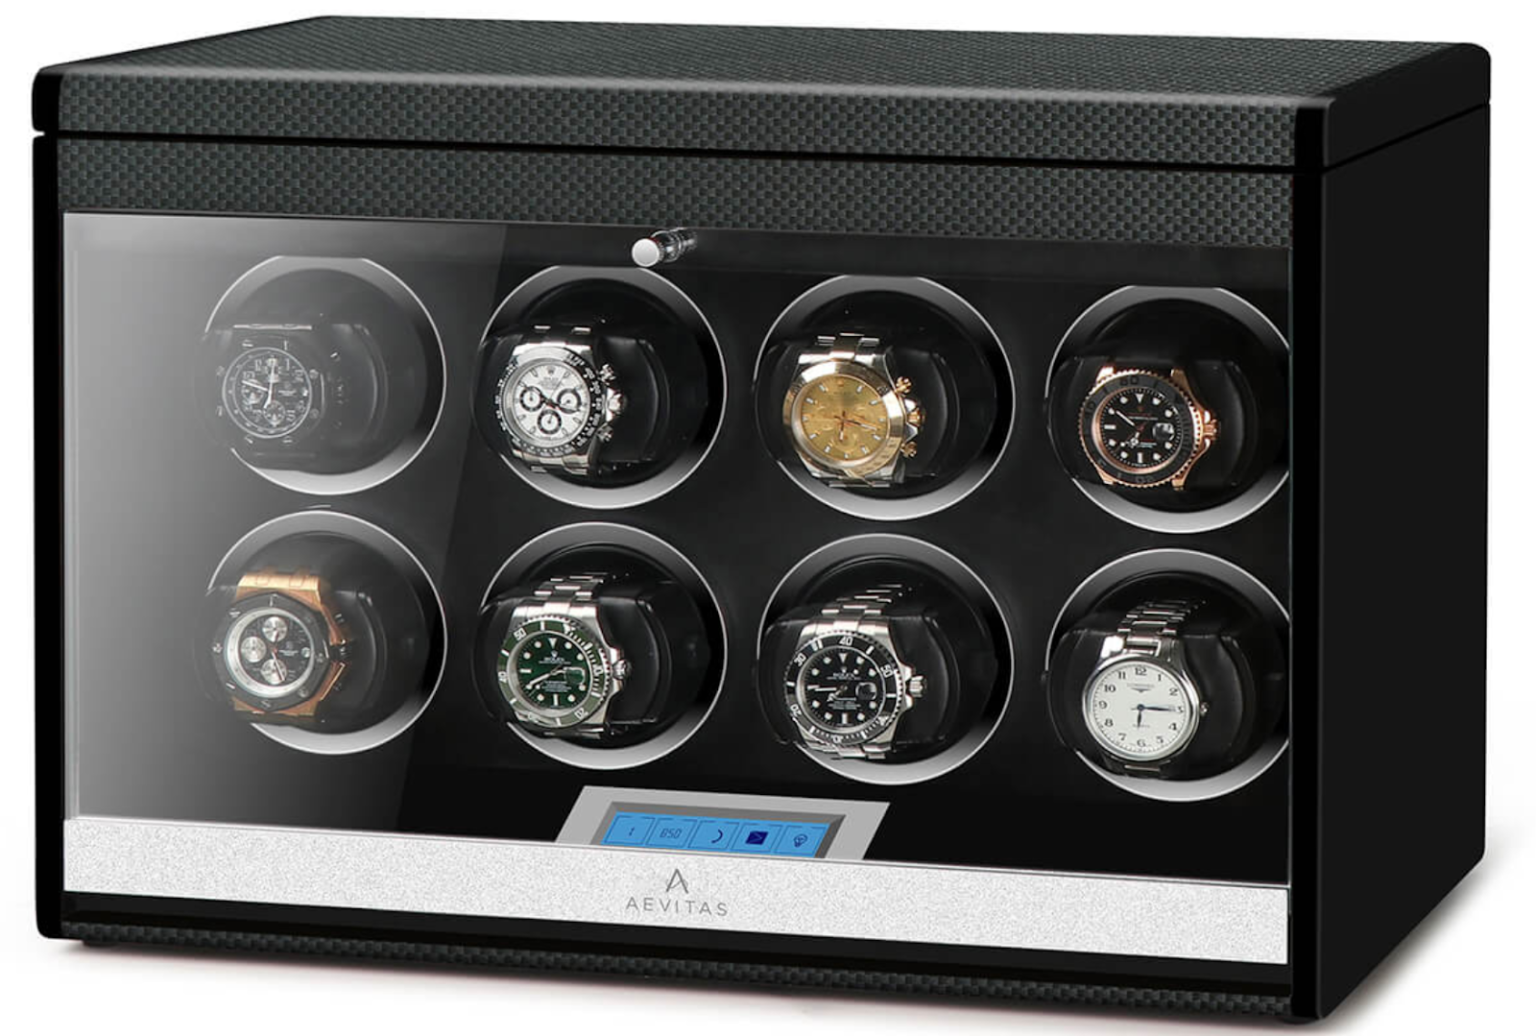 Choosing the Perfect Watch Winder: Aevitas vs Barrington - The Battle of the Best